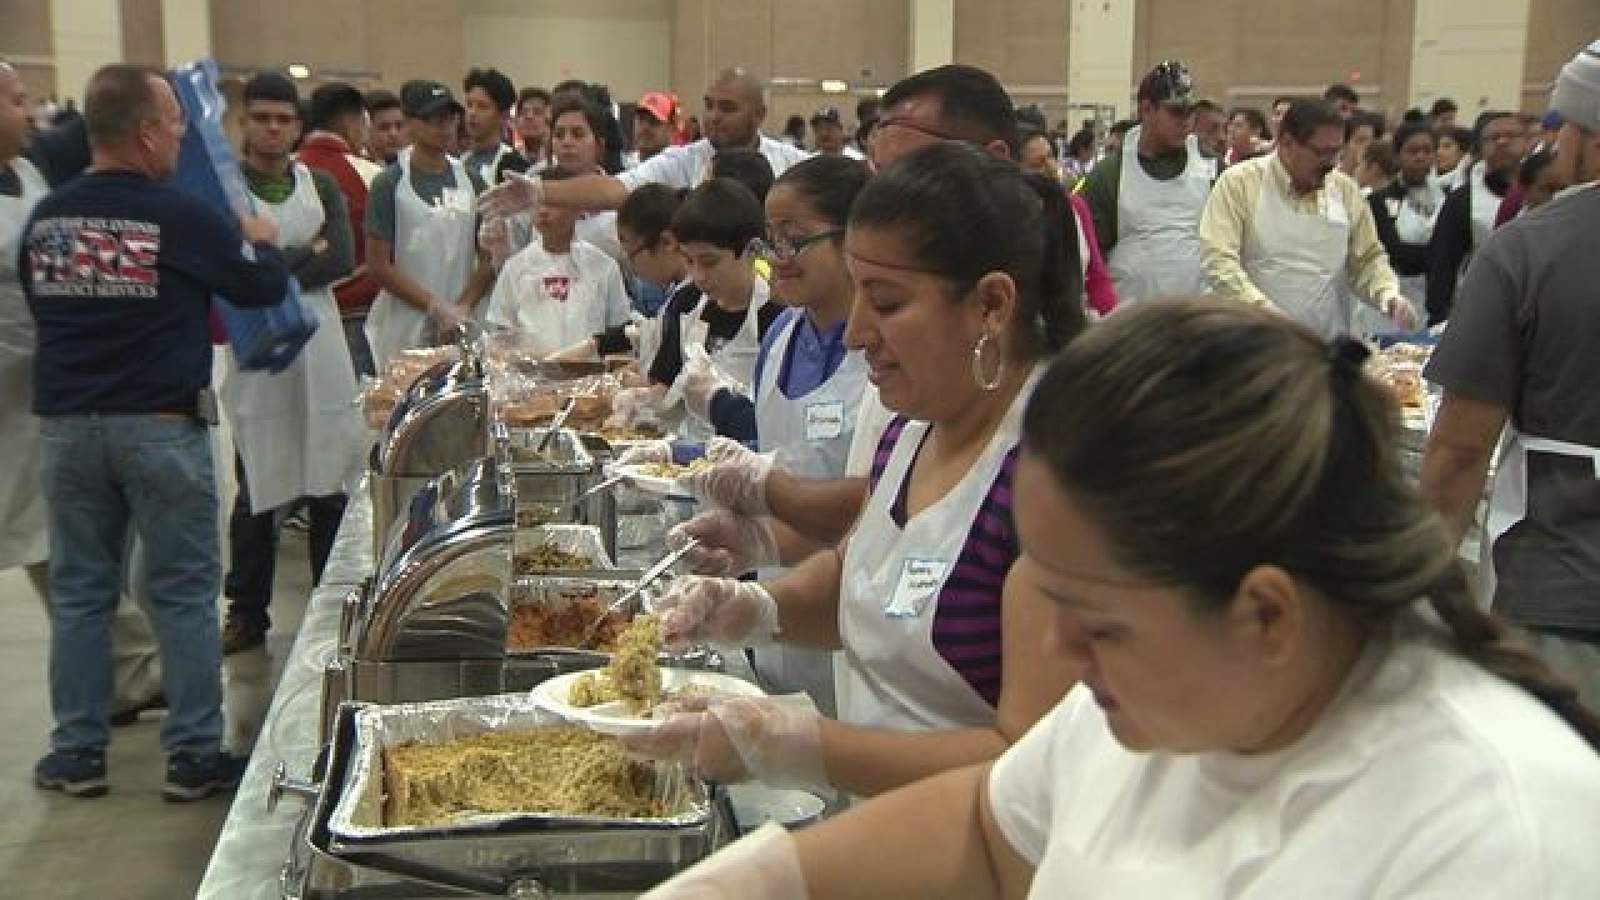 Raul Jimenez Thanksgiving Dinner reaches full capacity in meal requests, closes registration